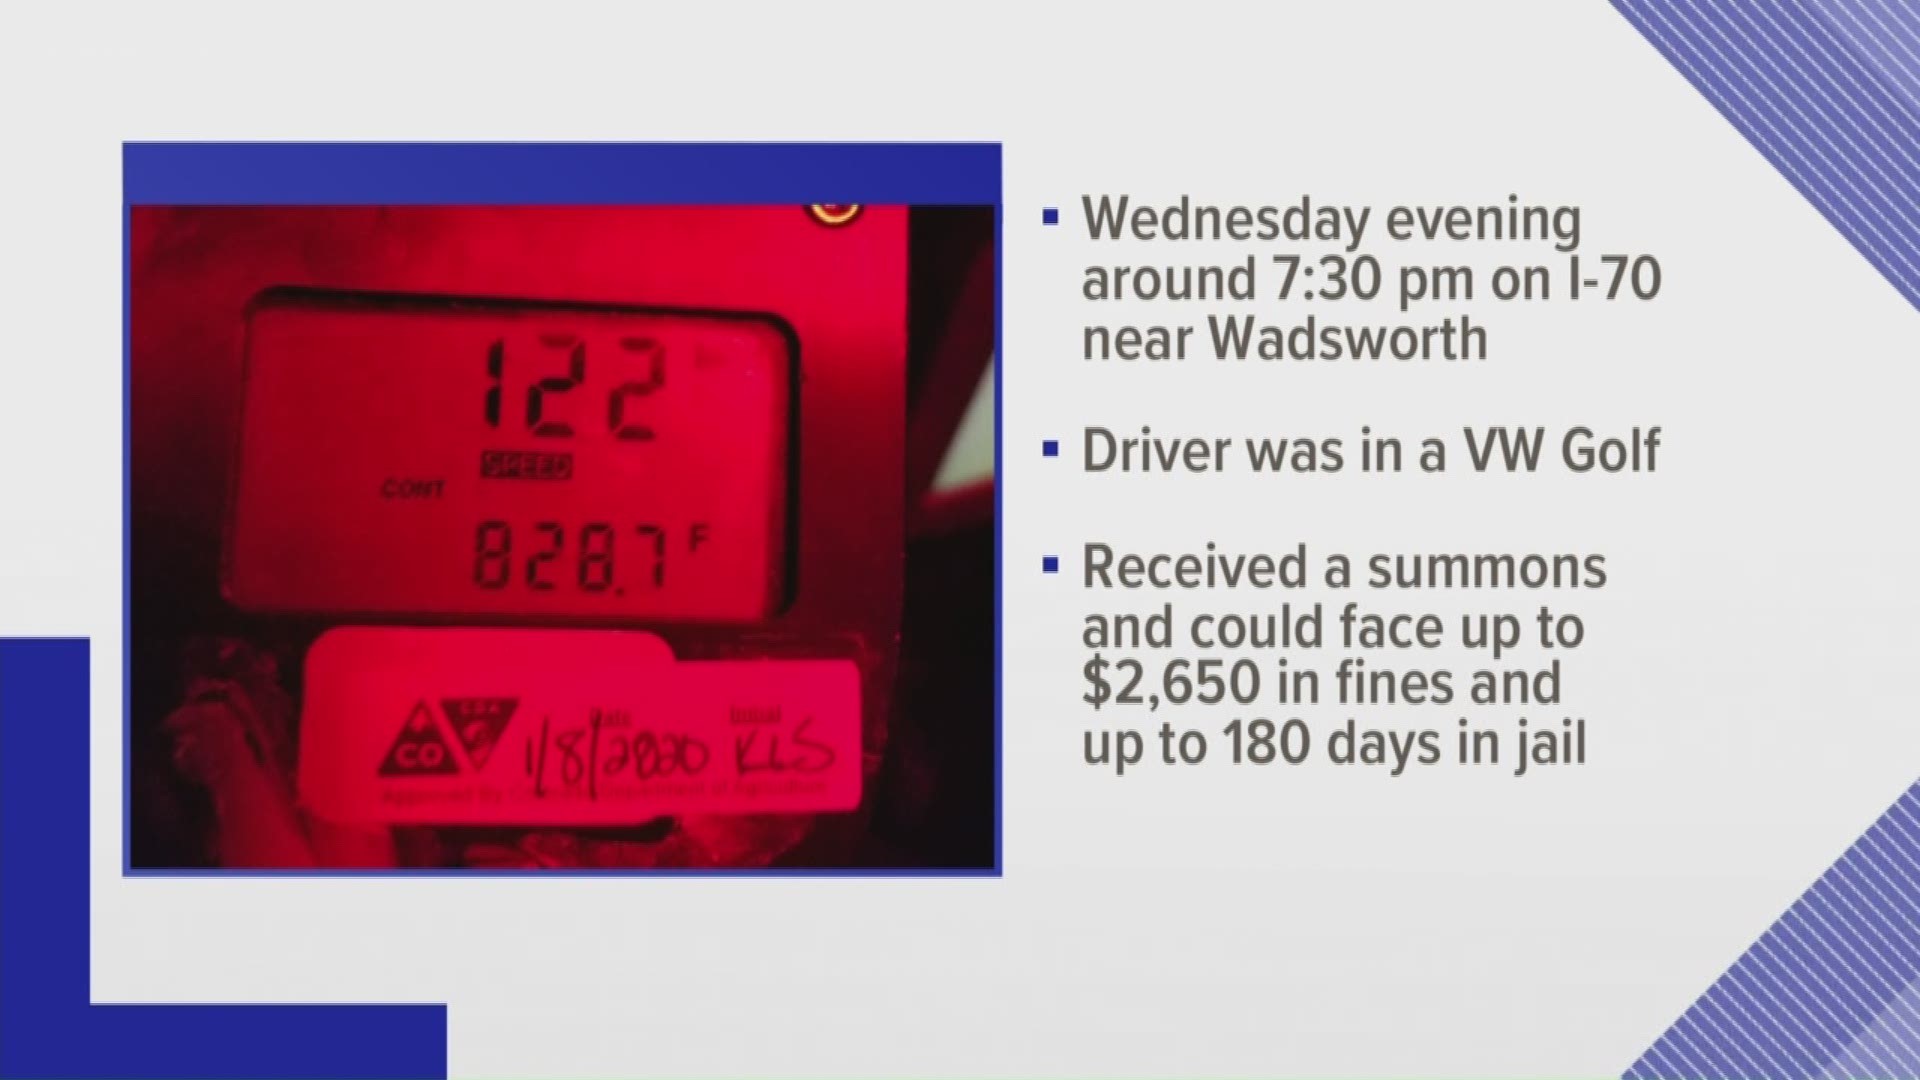 Yes, the driver received a summons -- up to $2,650 in fines, and up to 180 days in jail.